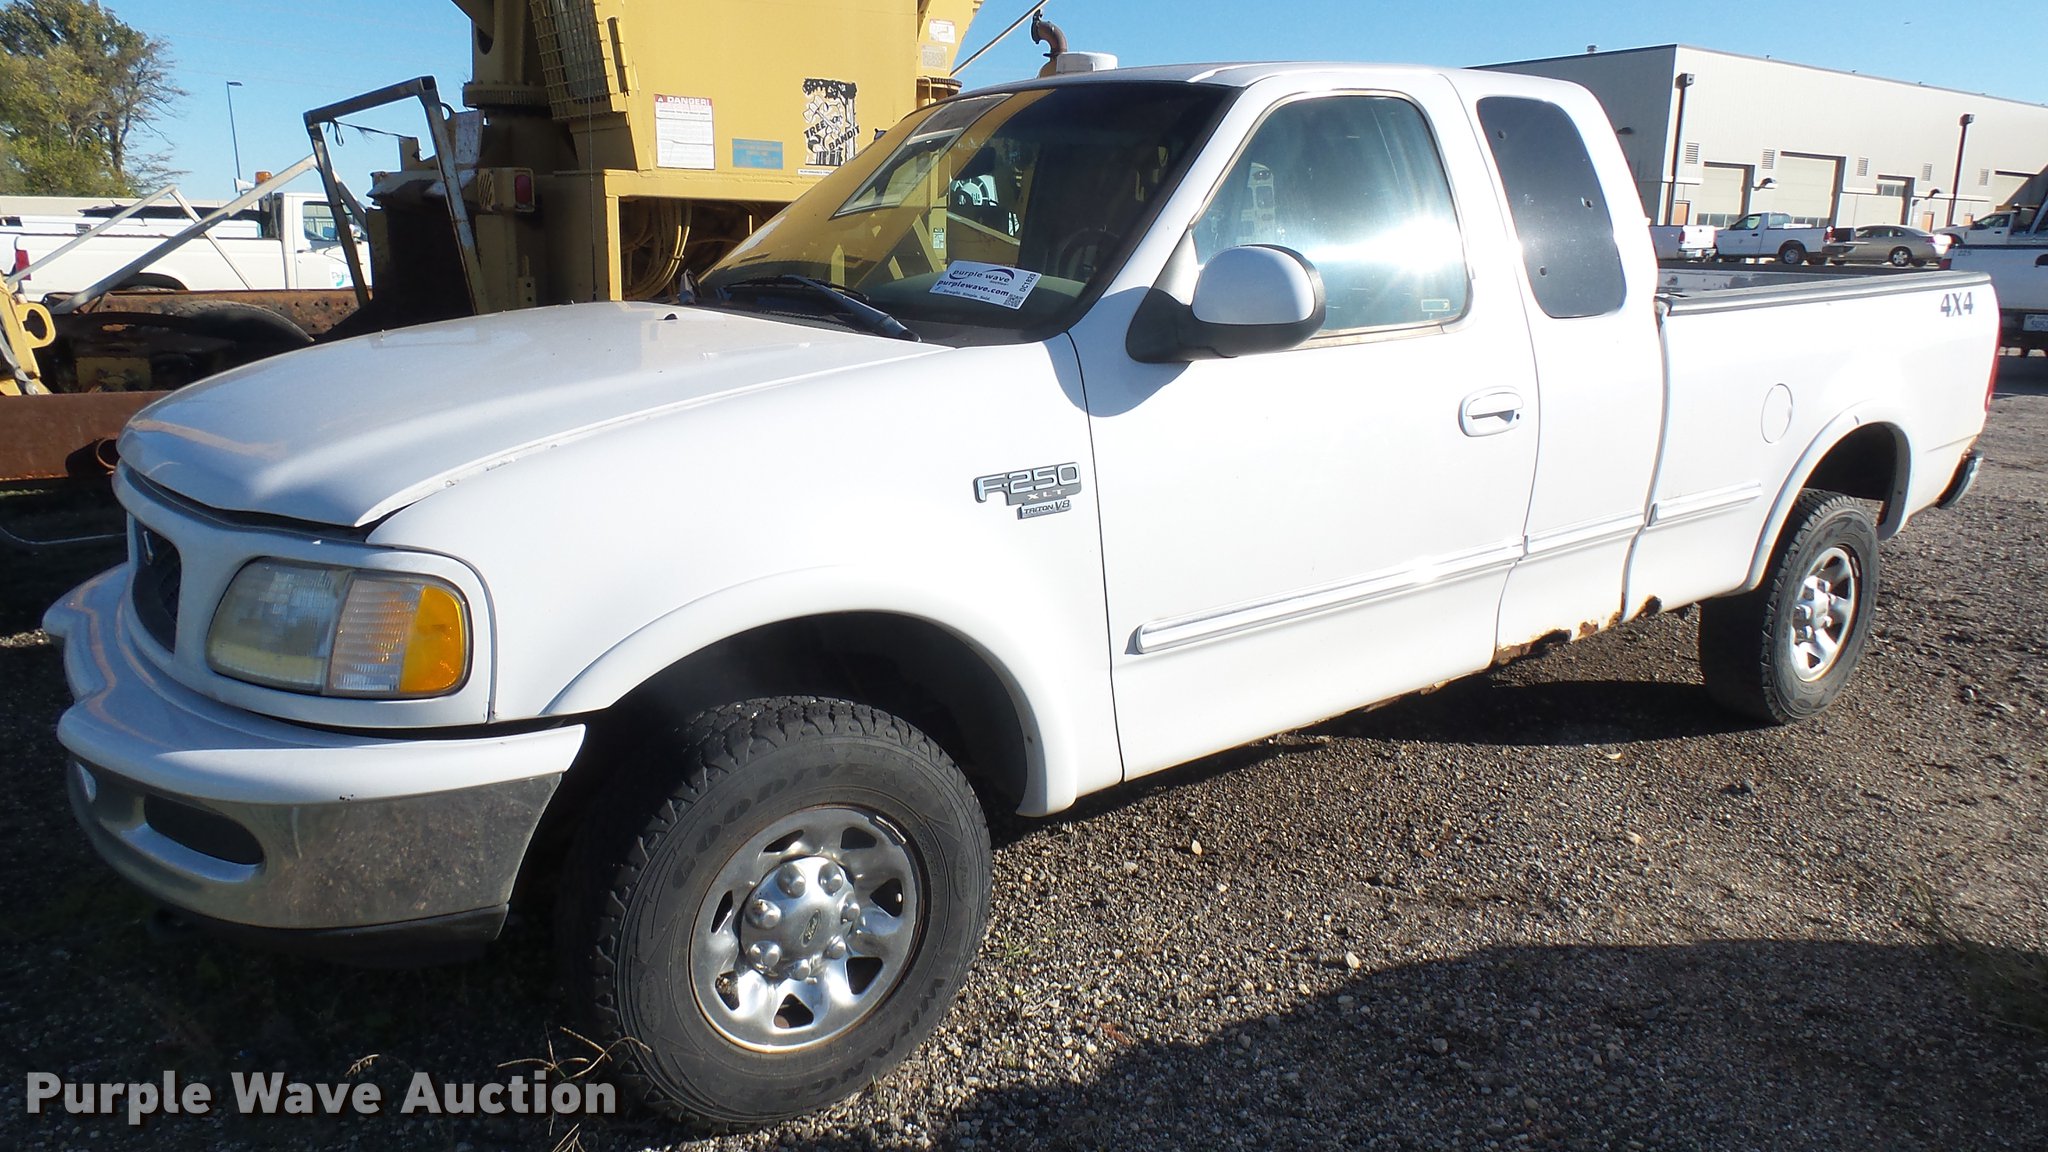 1998 Ford F250 SuperCab pickup truck in Derby, KS | Item DC1820 sold |  Purple Wave